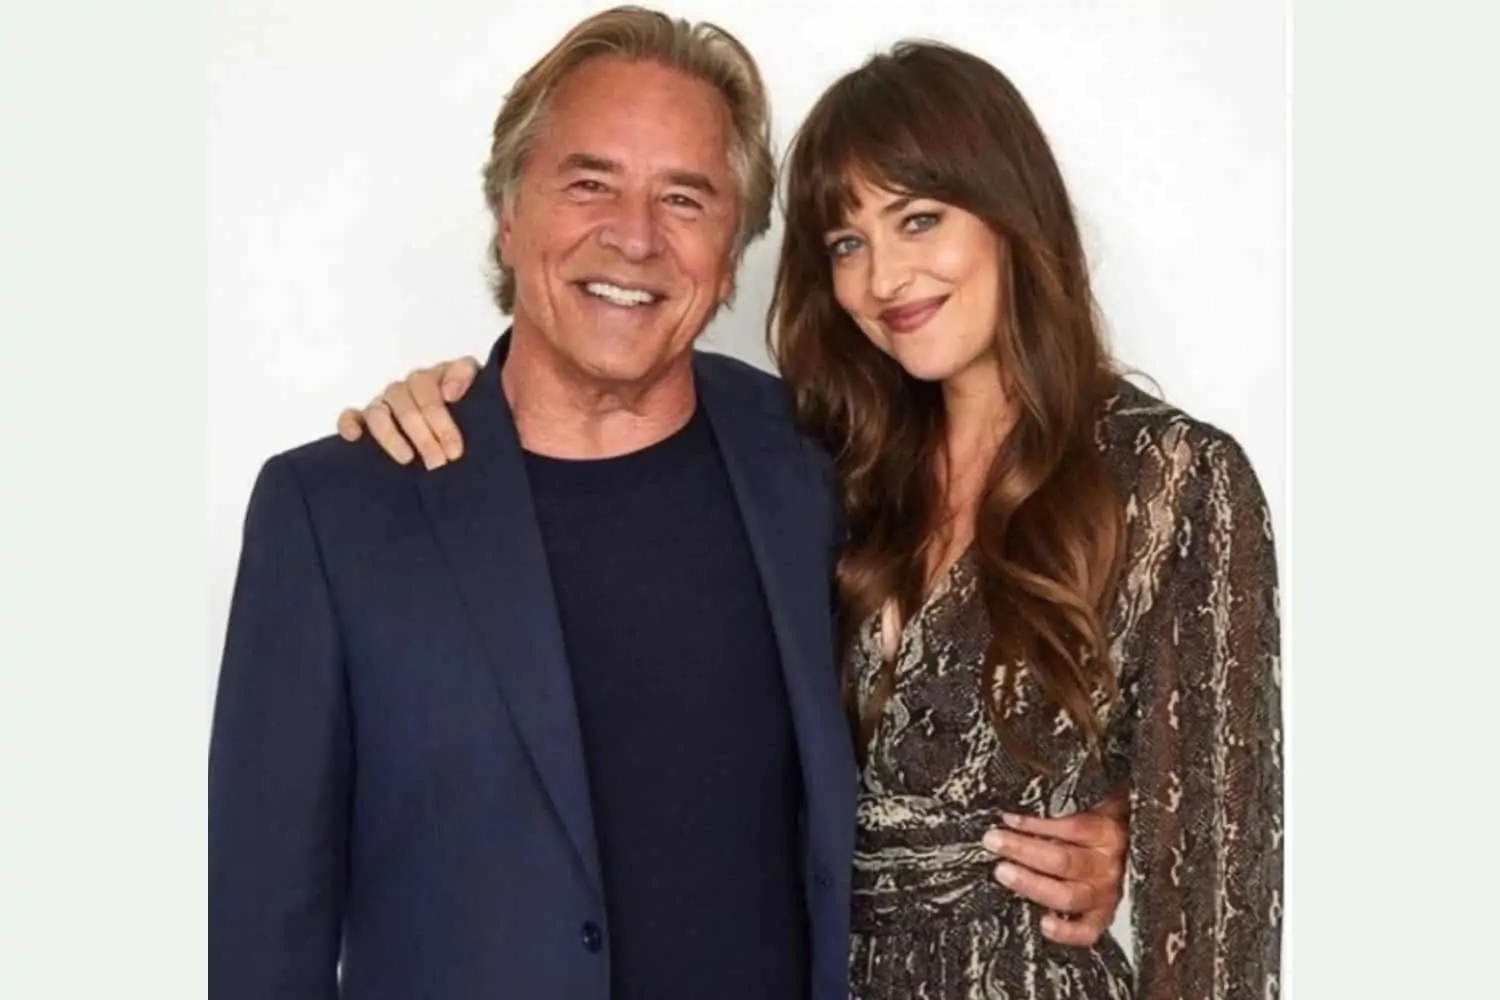 Dakota Johnson's father was removed from her latest movie premiere - here's why